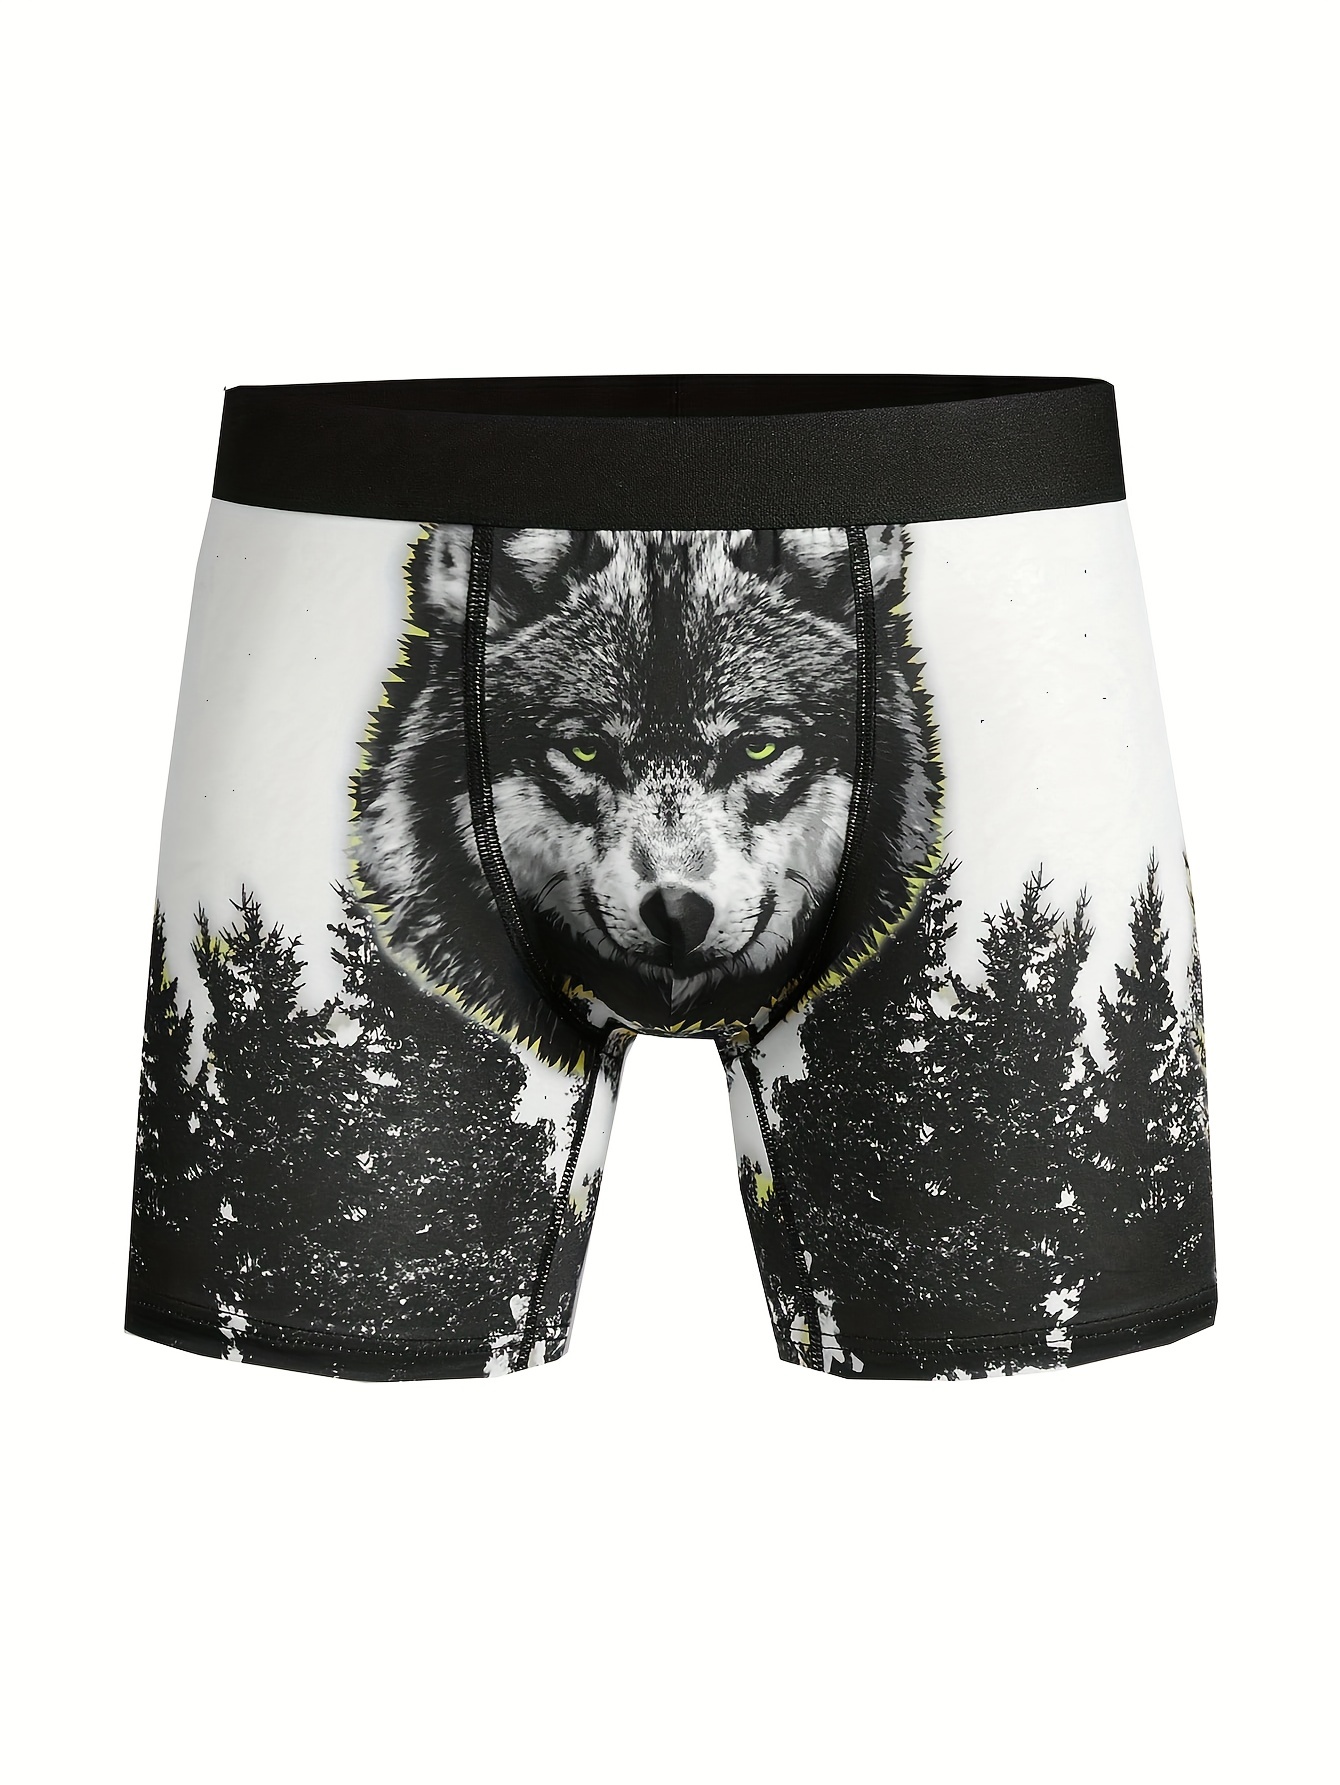 Funny Text Men's Boxer Briefs in Case of an Emergency, Pull Down 